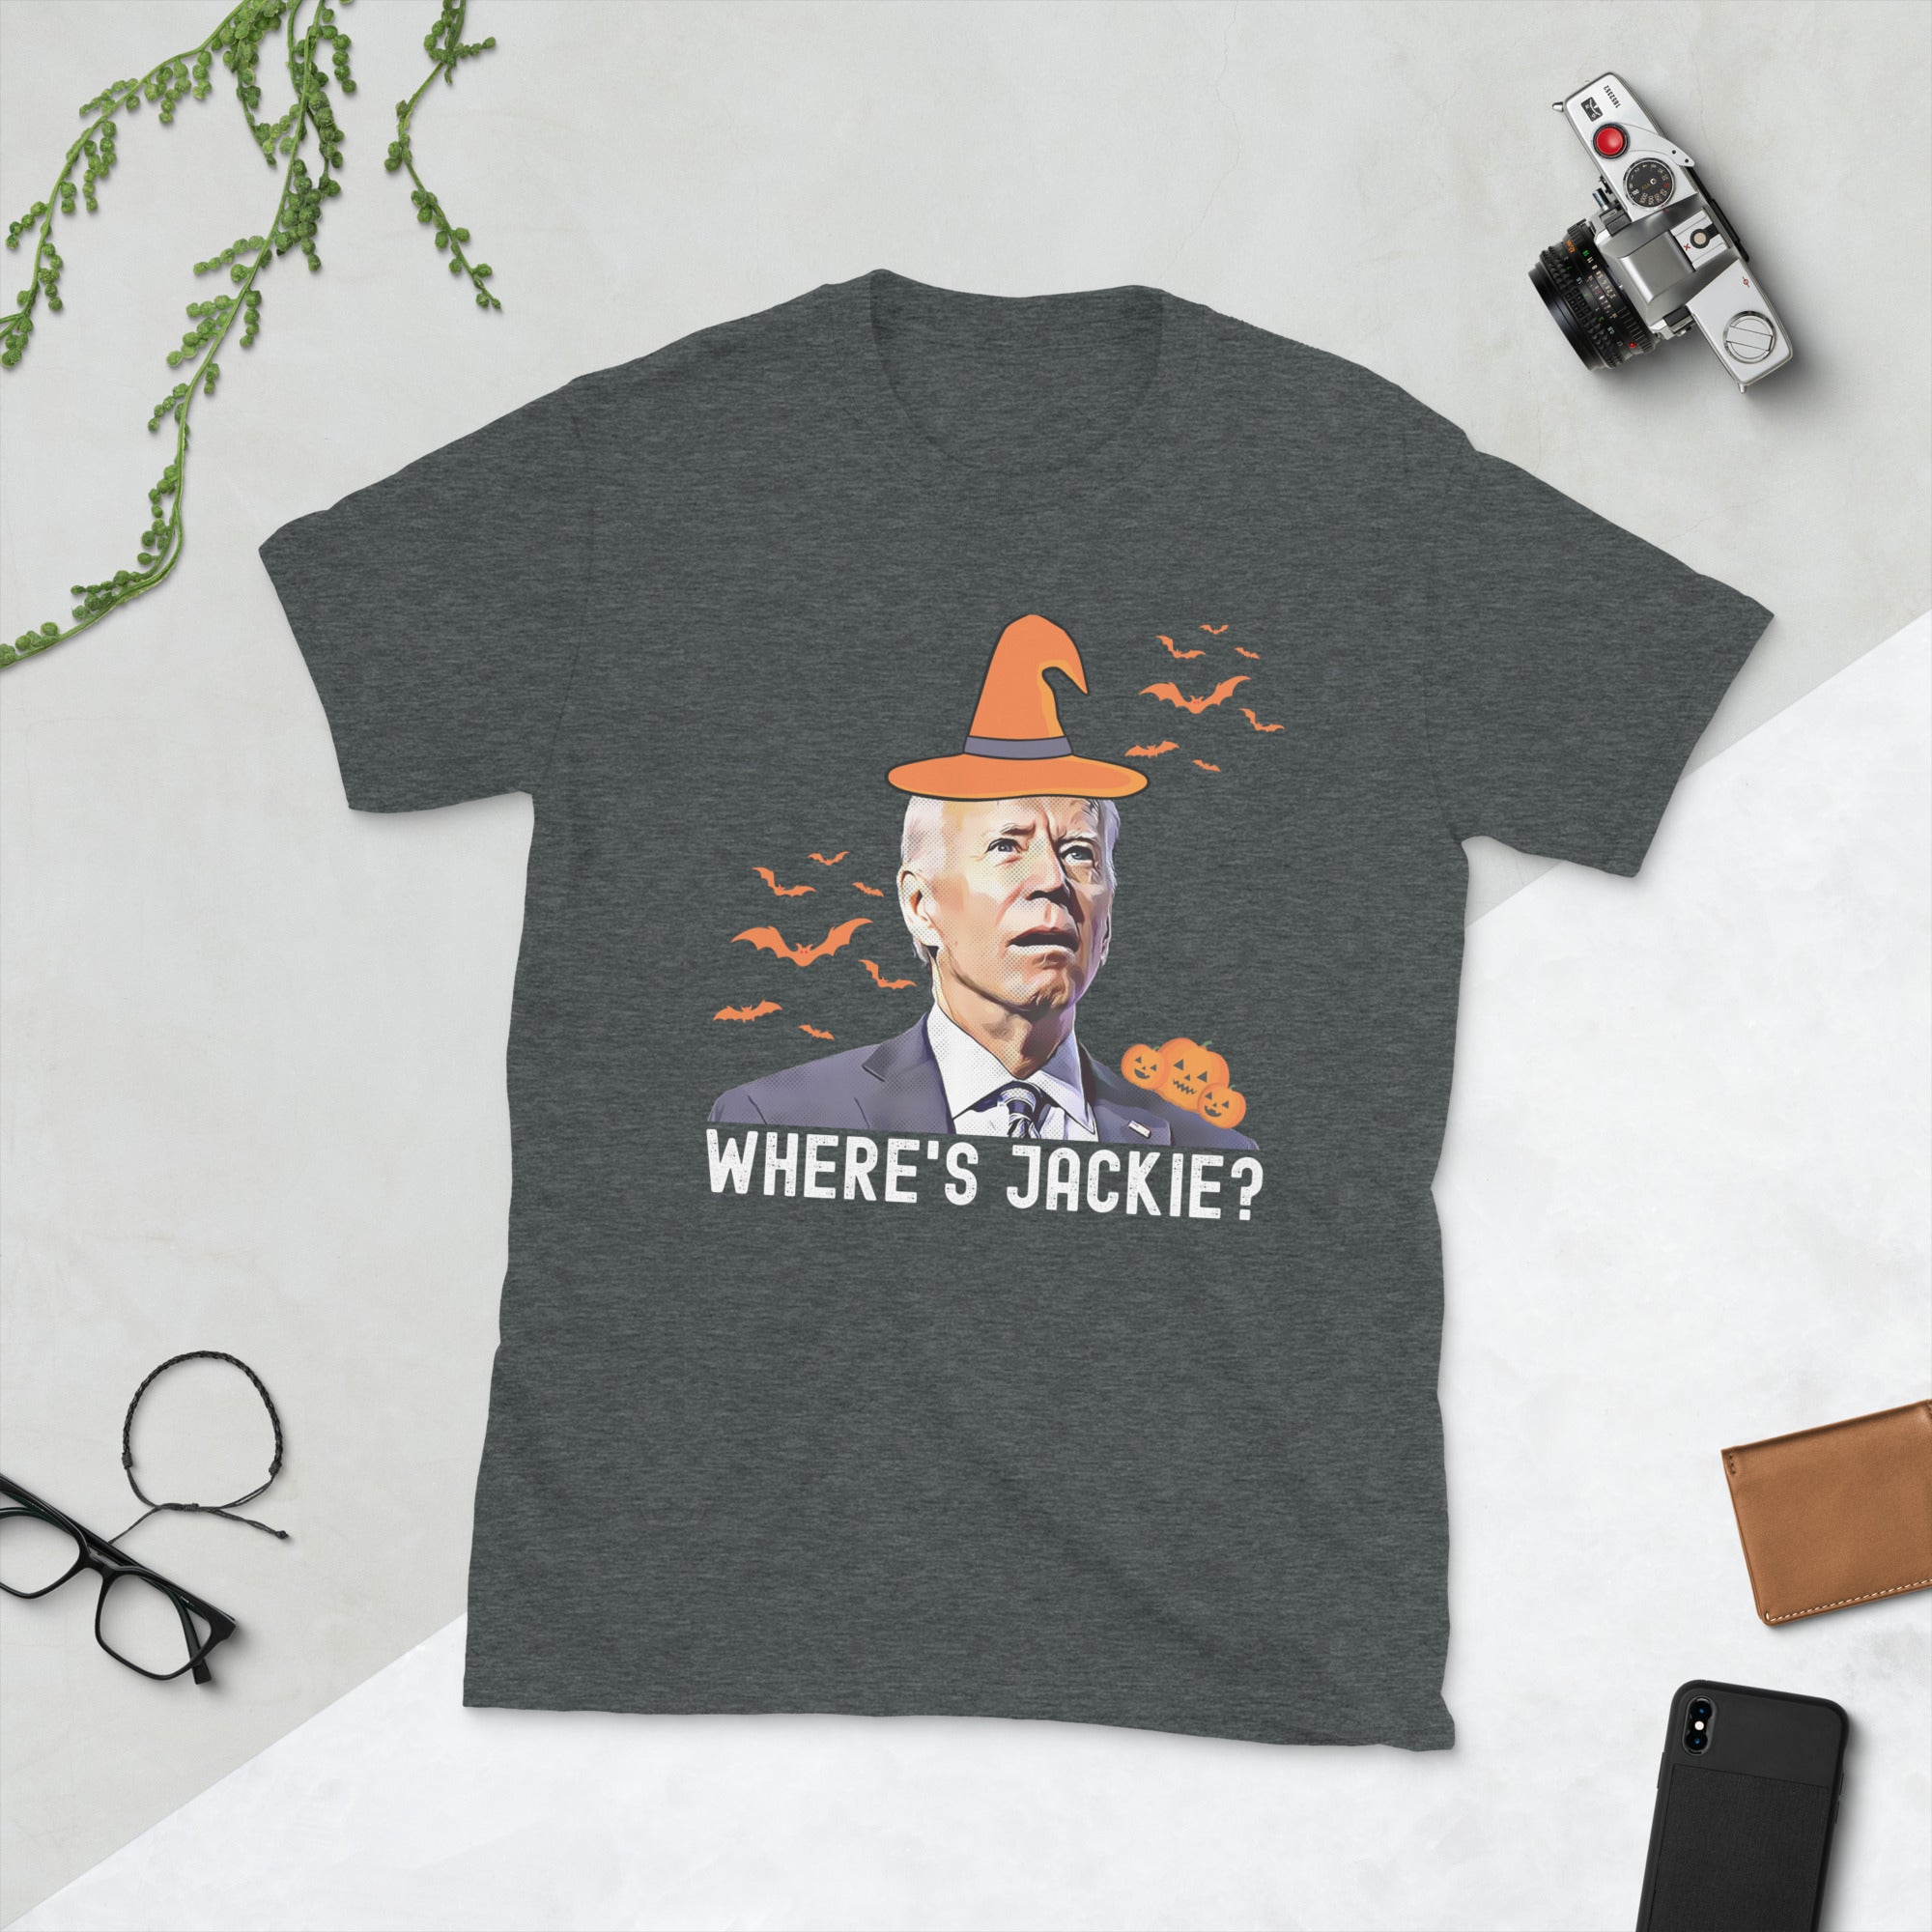 Wheres Jackie Funny Anti Biden Shirt, Where is Jackie, Jackie Are You Here Biden Tshirt, Joe Biden Confused, Republican Shirt, FJB T Shirt - Madeinsea©